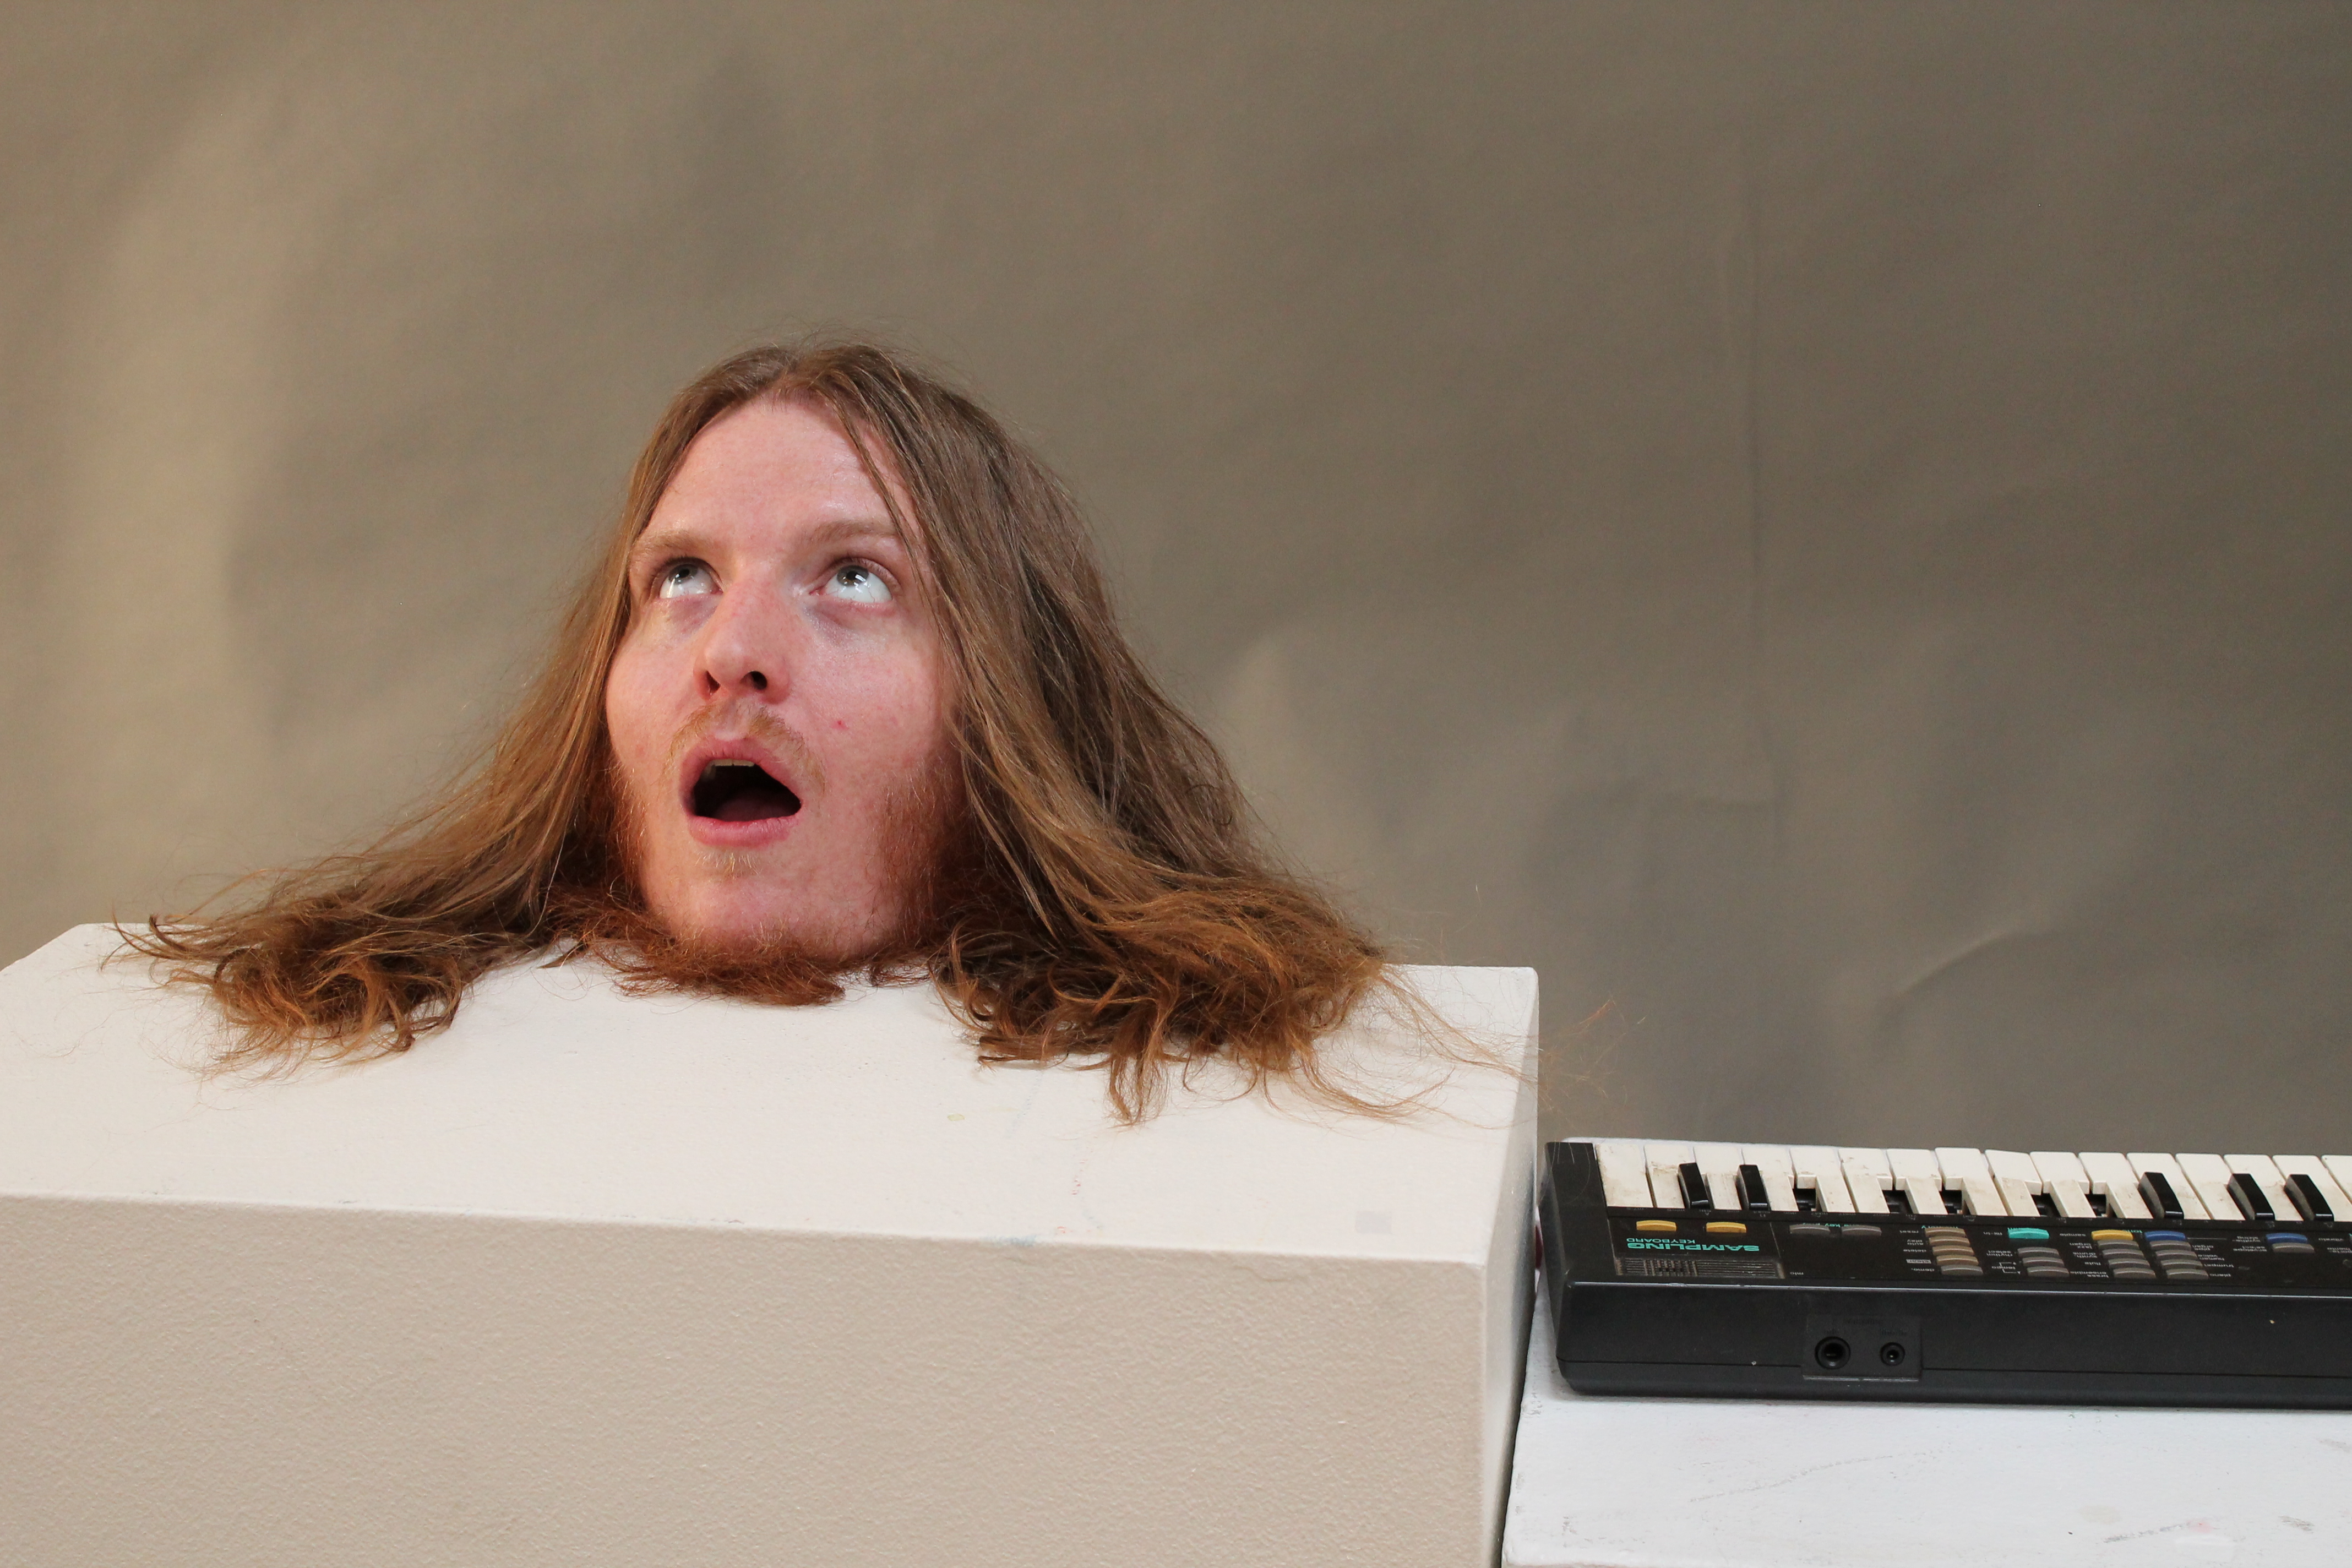 Fun with broken keyboards and heads on pedestals.